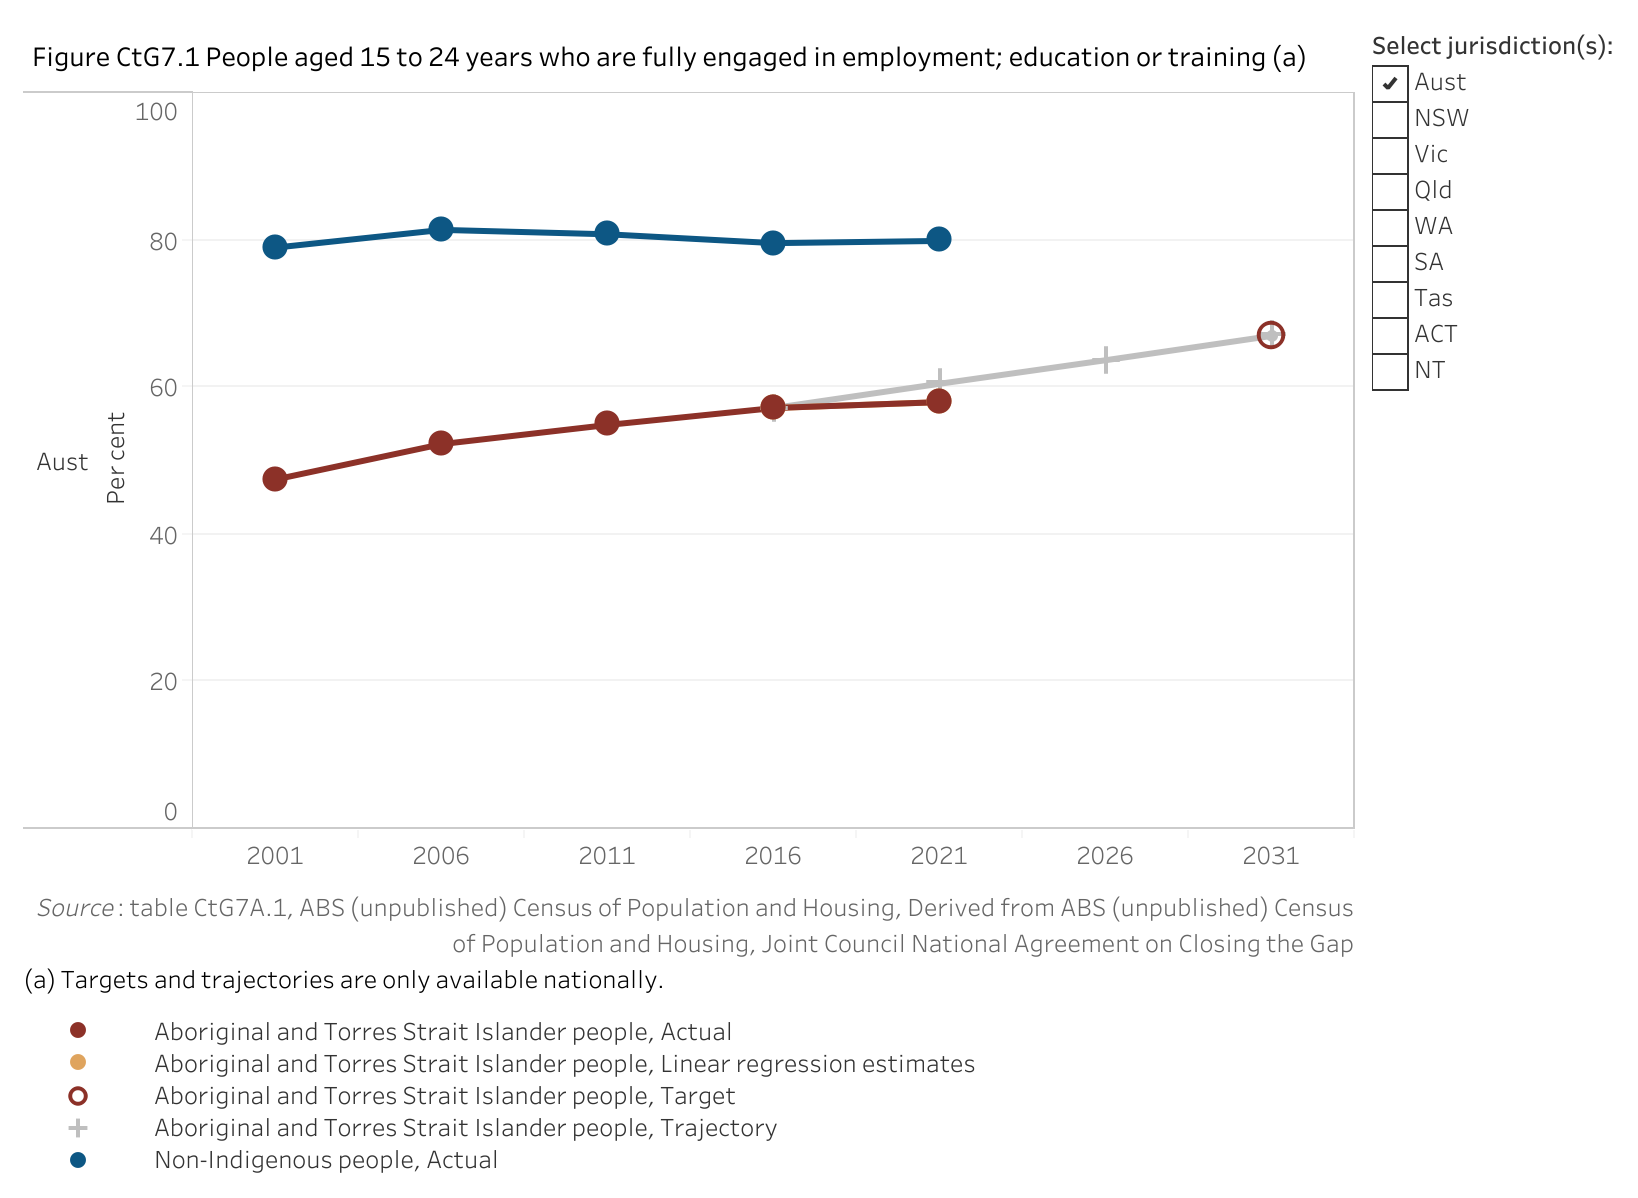 Figure CtG7.1 shows people aged 15 to 24 years who are fully engaged in employment; education or training. More details can be found within the text near this image.